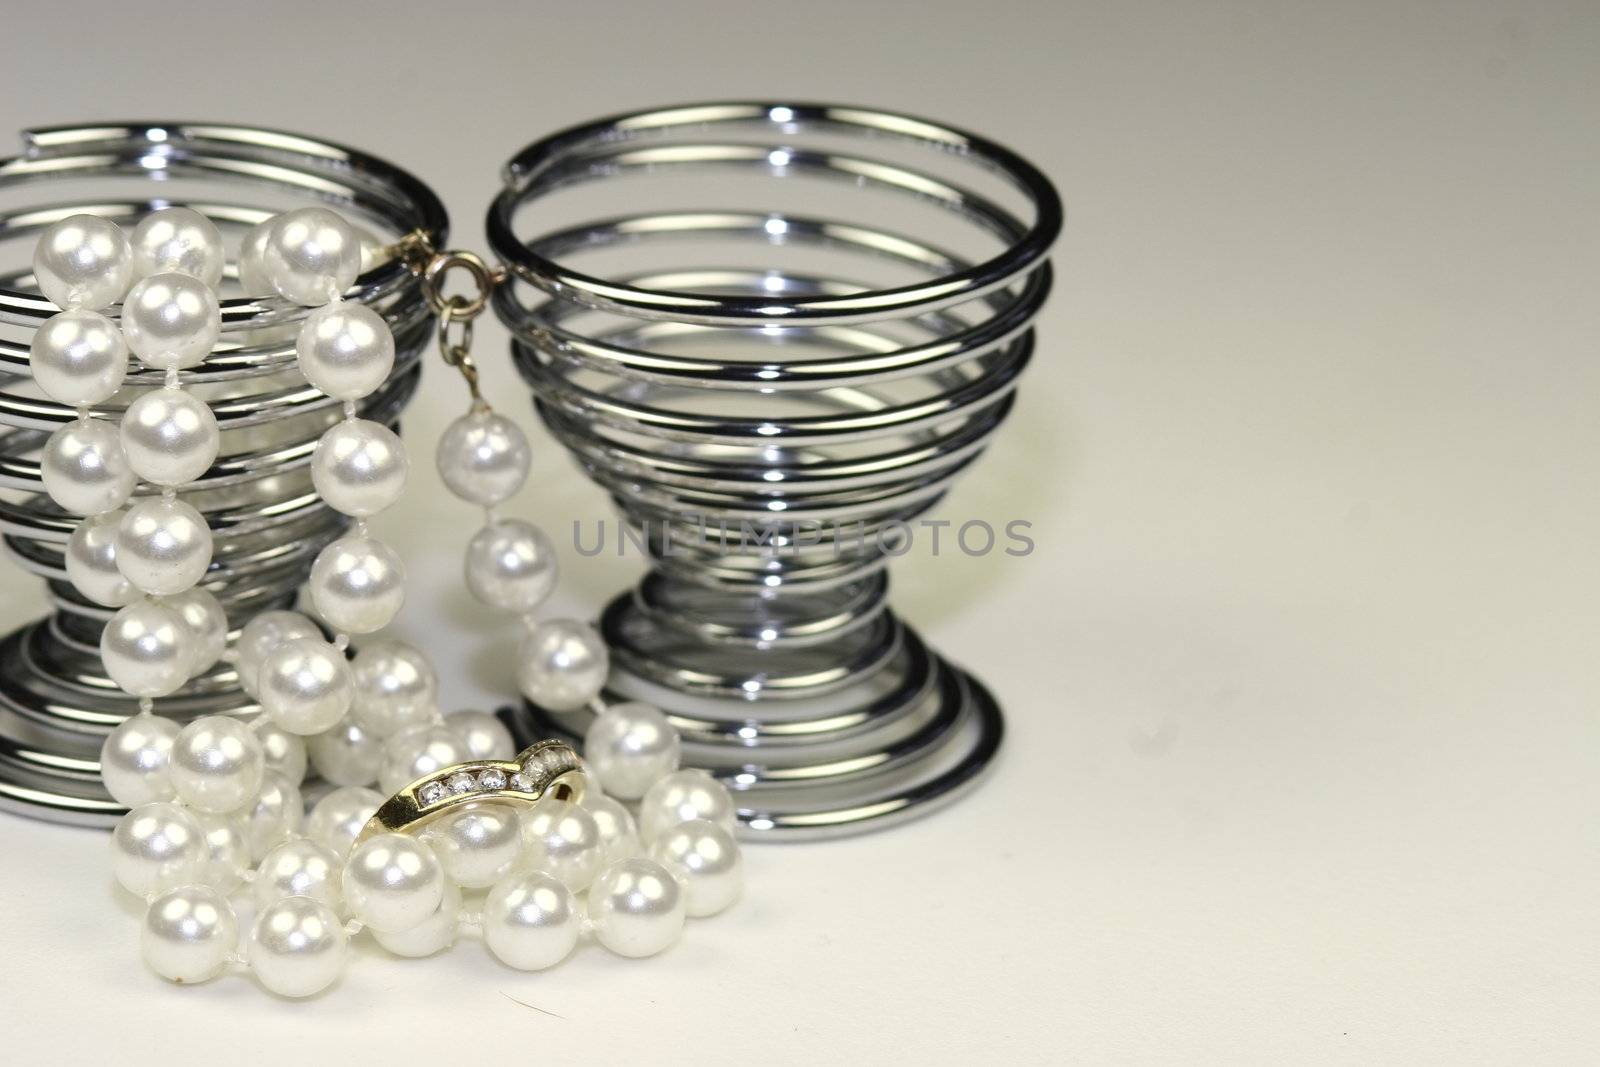 string of pearls with a wishbone diamond engagement ring and two egg cups wedding breakfast concept